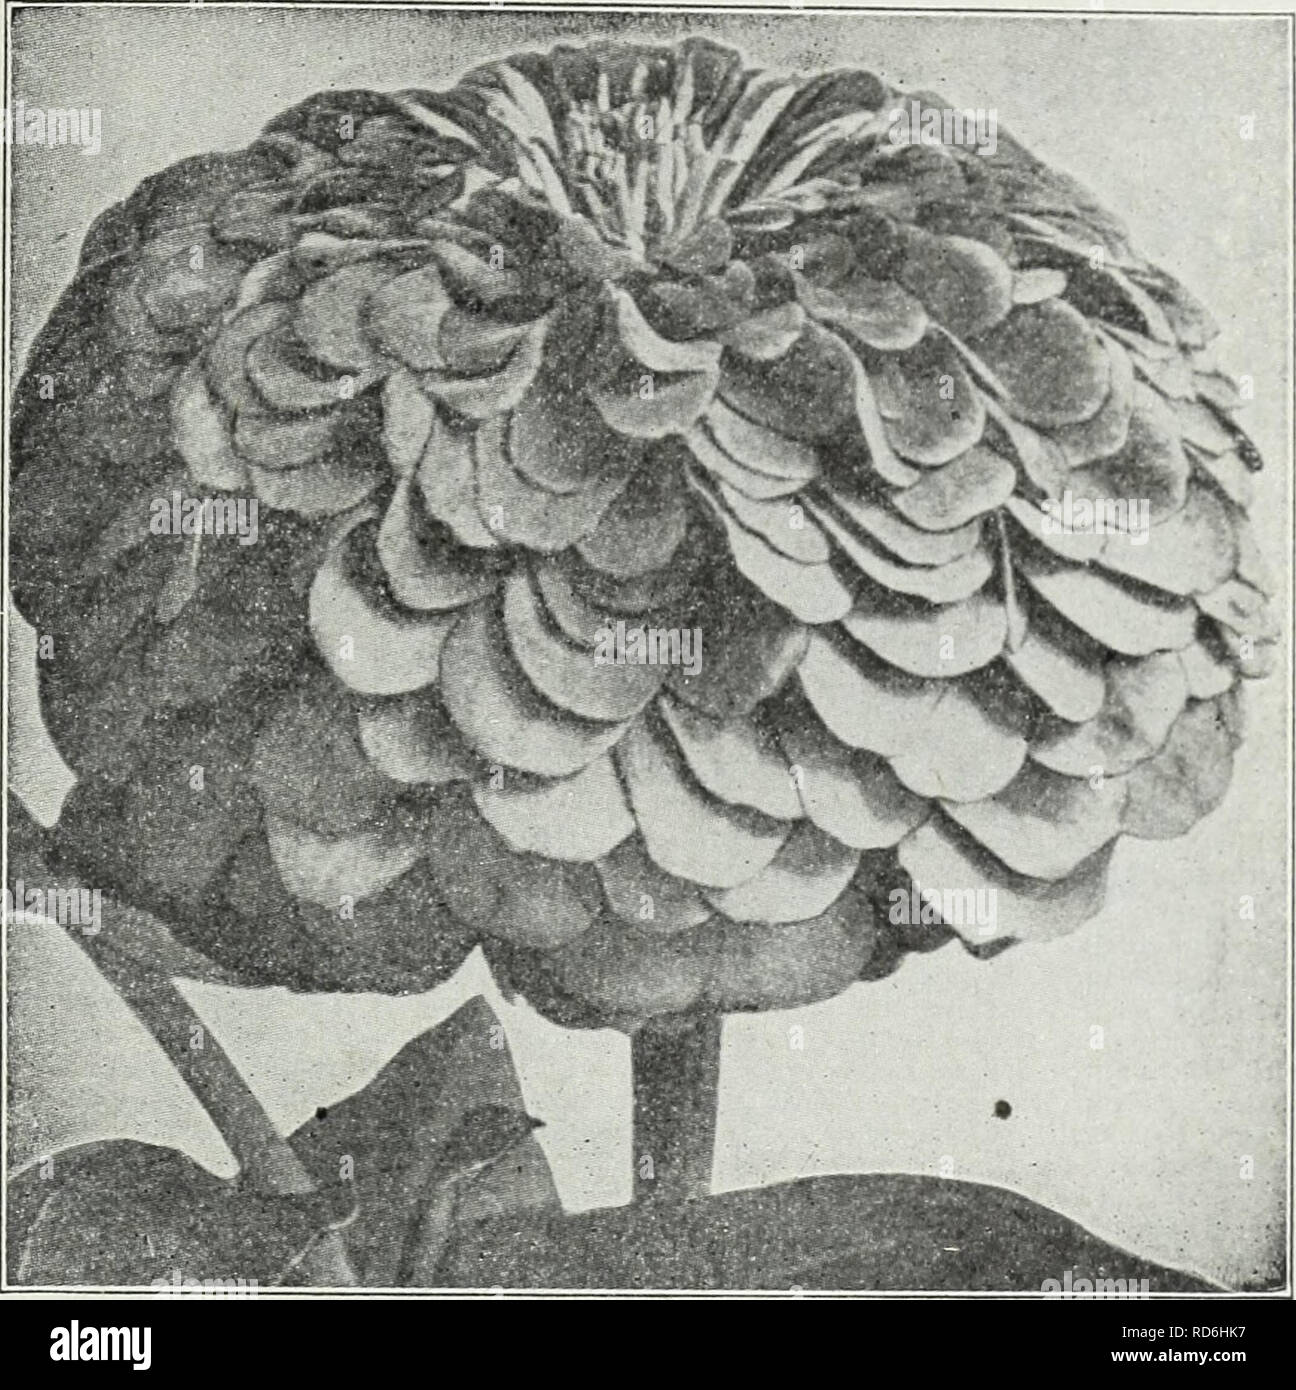 . Currie's farm and garden annual : spring 1930. Flowers Seeds Catalogs; Bulbs (Plants) Seeds Catalogs; Vegetables Seeds Catalogs; Nurseries (Horticulture) Catalogs; Plants, Ornamental Catalogs; Gardening Equipment and supplies Catalogs. 4. Currie's Seed Store, Milwaukee, Wisconsin &gt;•. Giant Flowering Zinnia. WALLFLOWER (GOLDLACK) Popular half-hardy perennials, greatly esteemed for their delightfully fragrant flowers. Pkt. Belvoir Castle-^-Single yellow $0.10 Blood Red—Single, deep red 10 Single, Finest Mixed 10 Double, Finest Mixed 10 Early Parisian—A new annual flowering variety, with bea Stock Photo